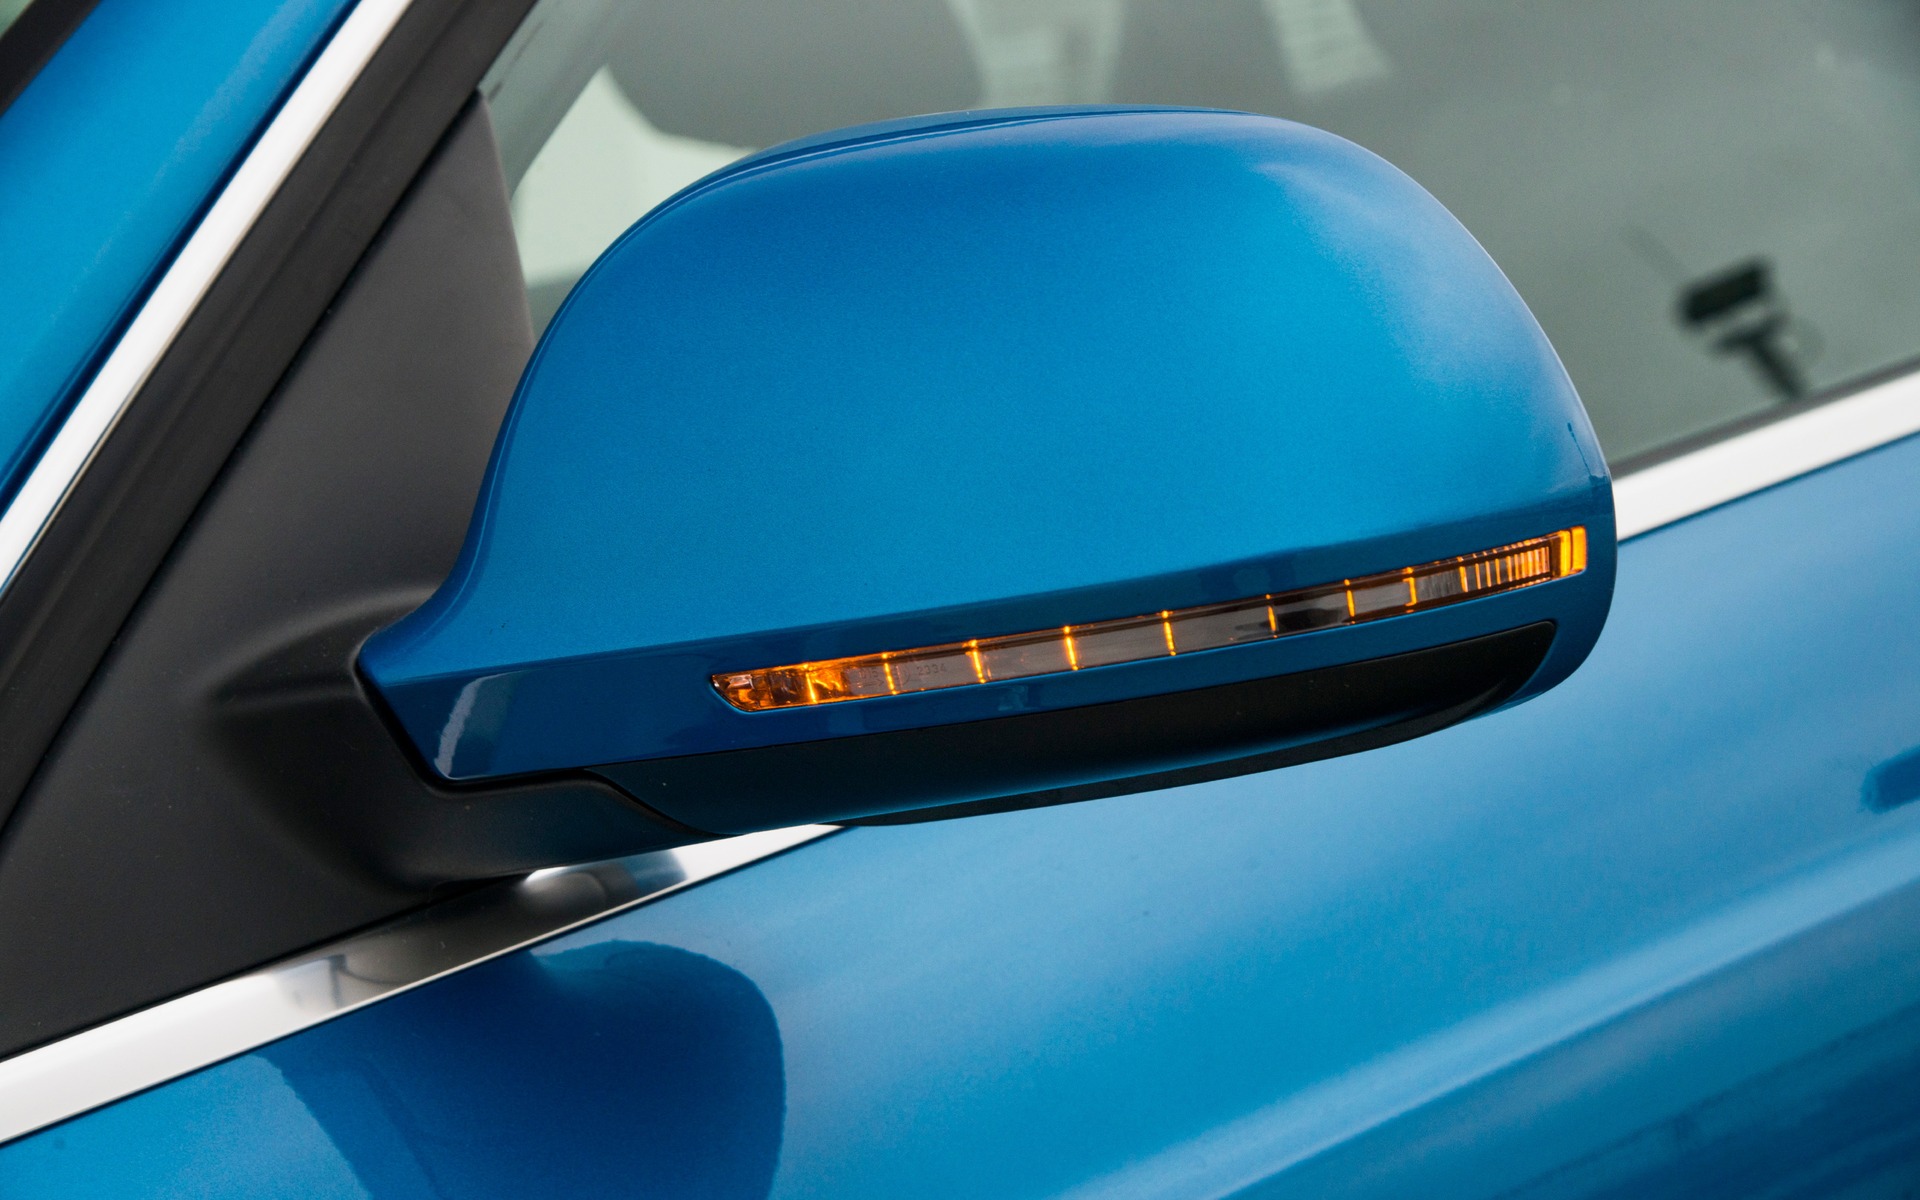 Turn indicator integrated into the sideview mirror.